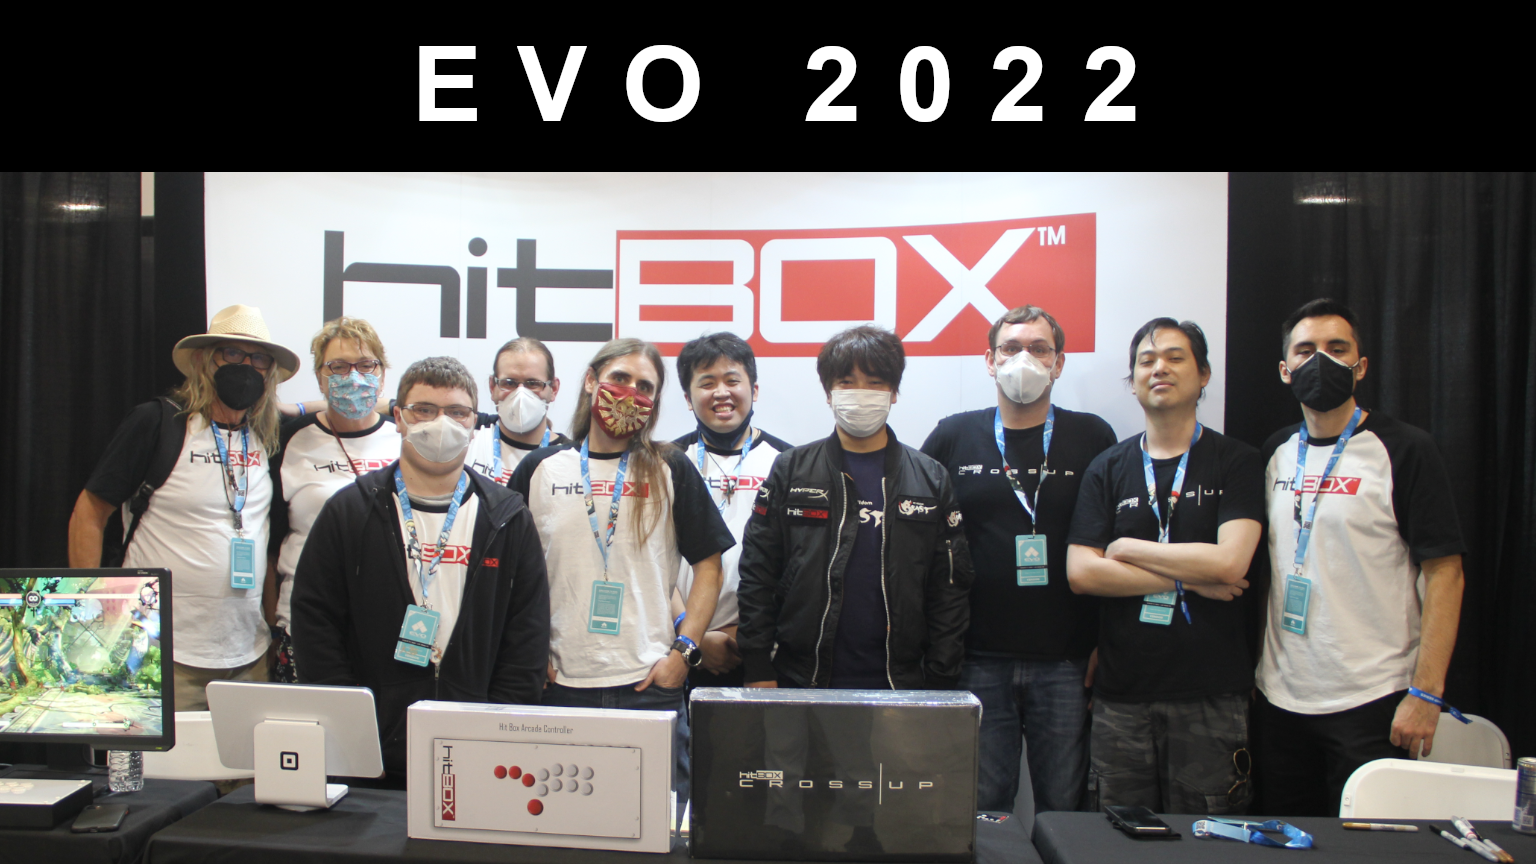 A Look Back at EVO 2022